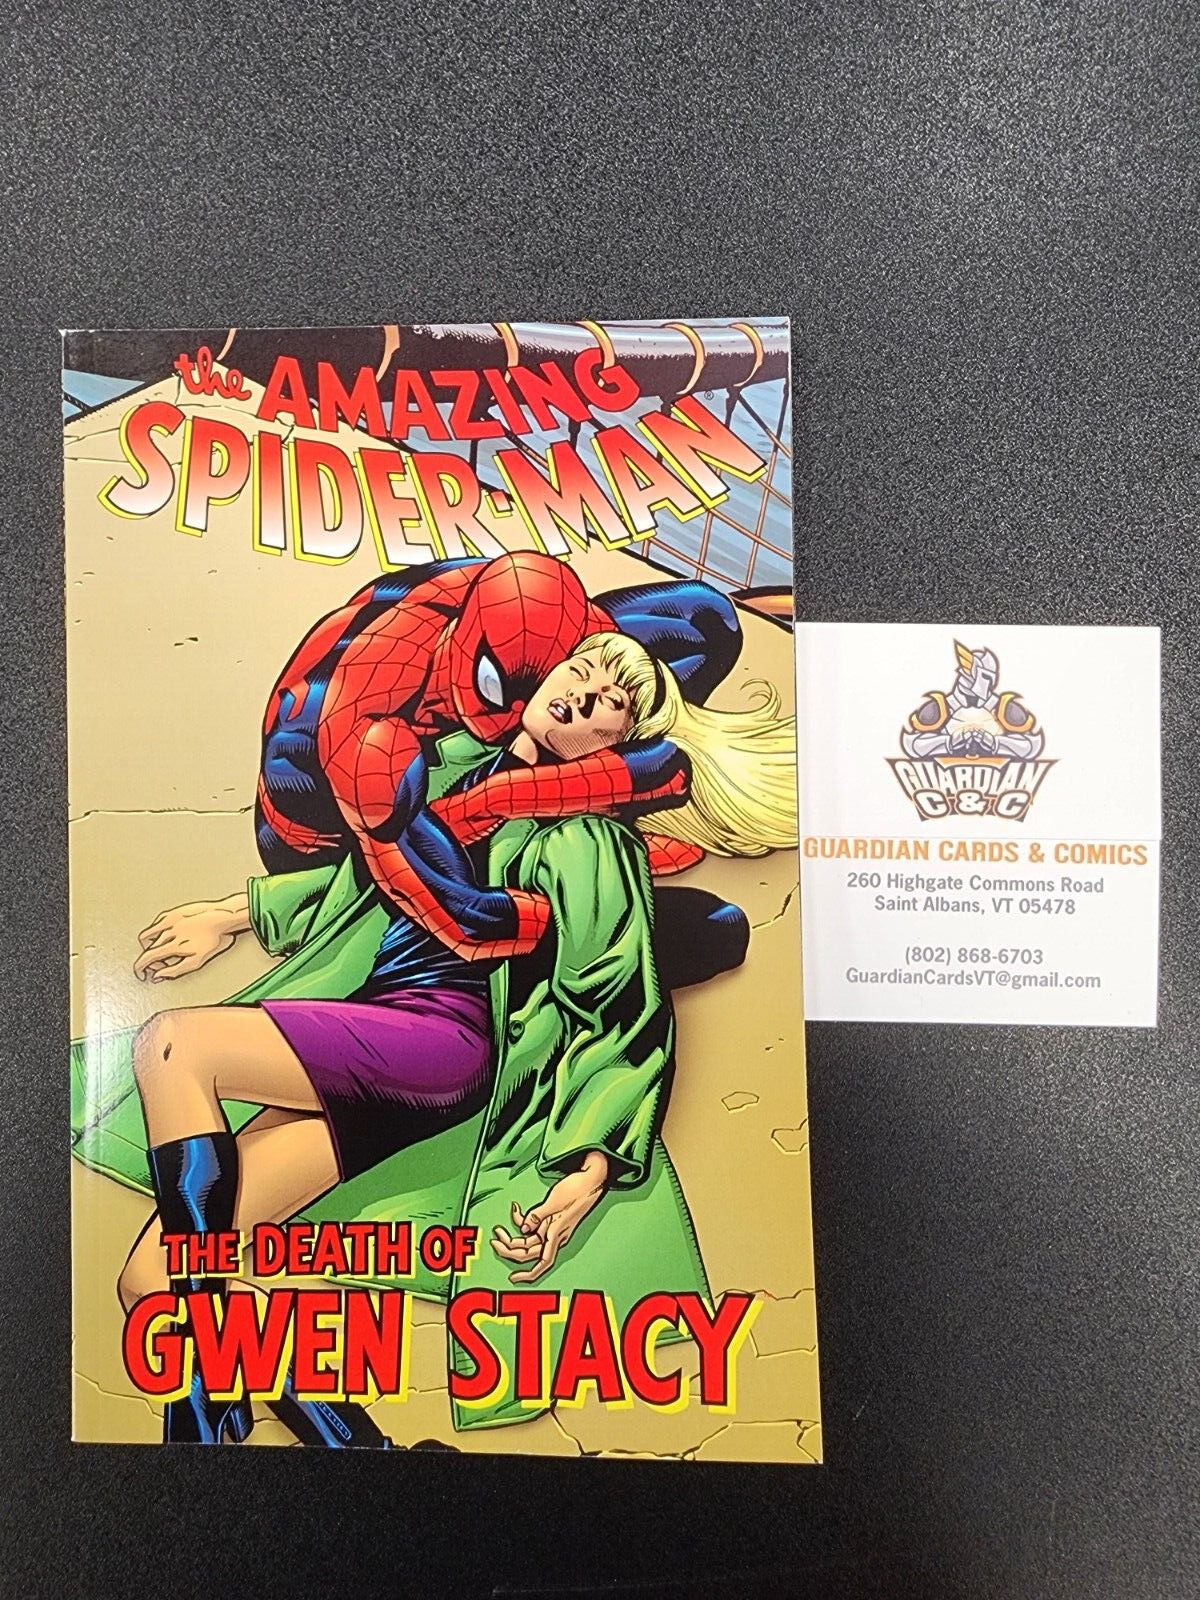 The Amazing Spider-Man: The Death of Gwen Stacy (Marvel, 2001) Graphic Novel TPB